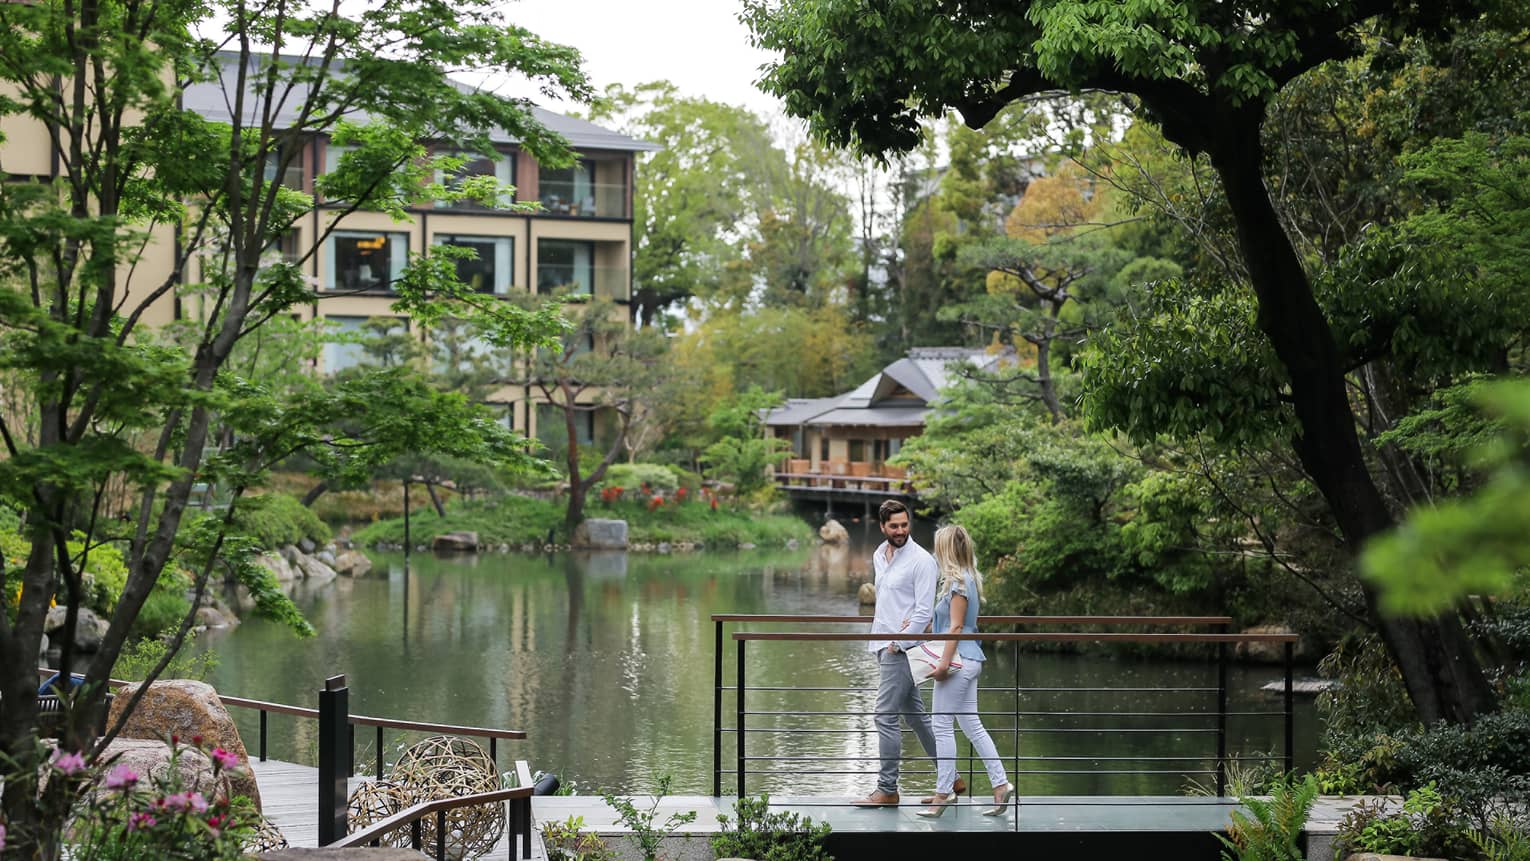 Couple walks across small bridge over pond surrounded by trees